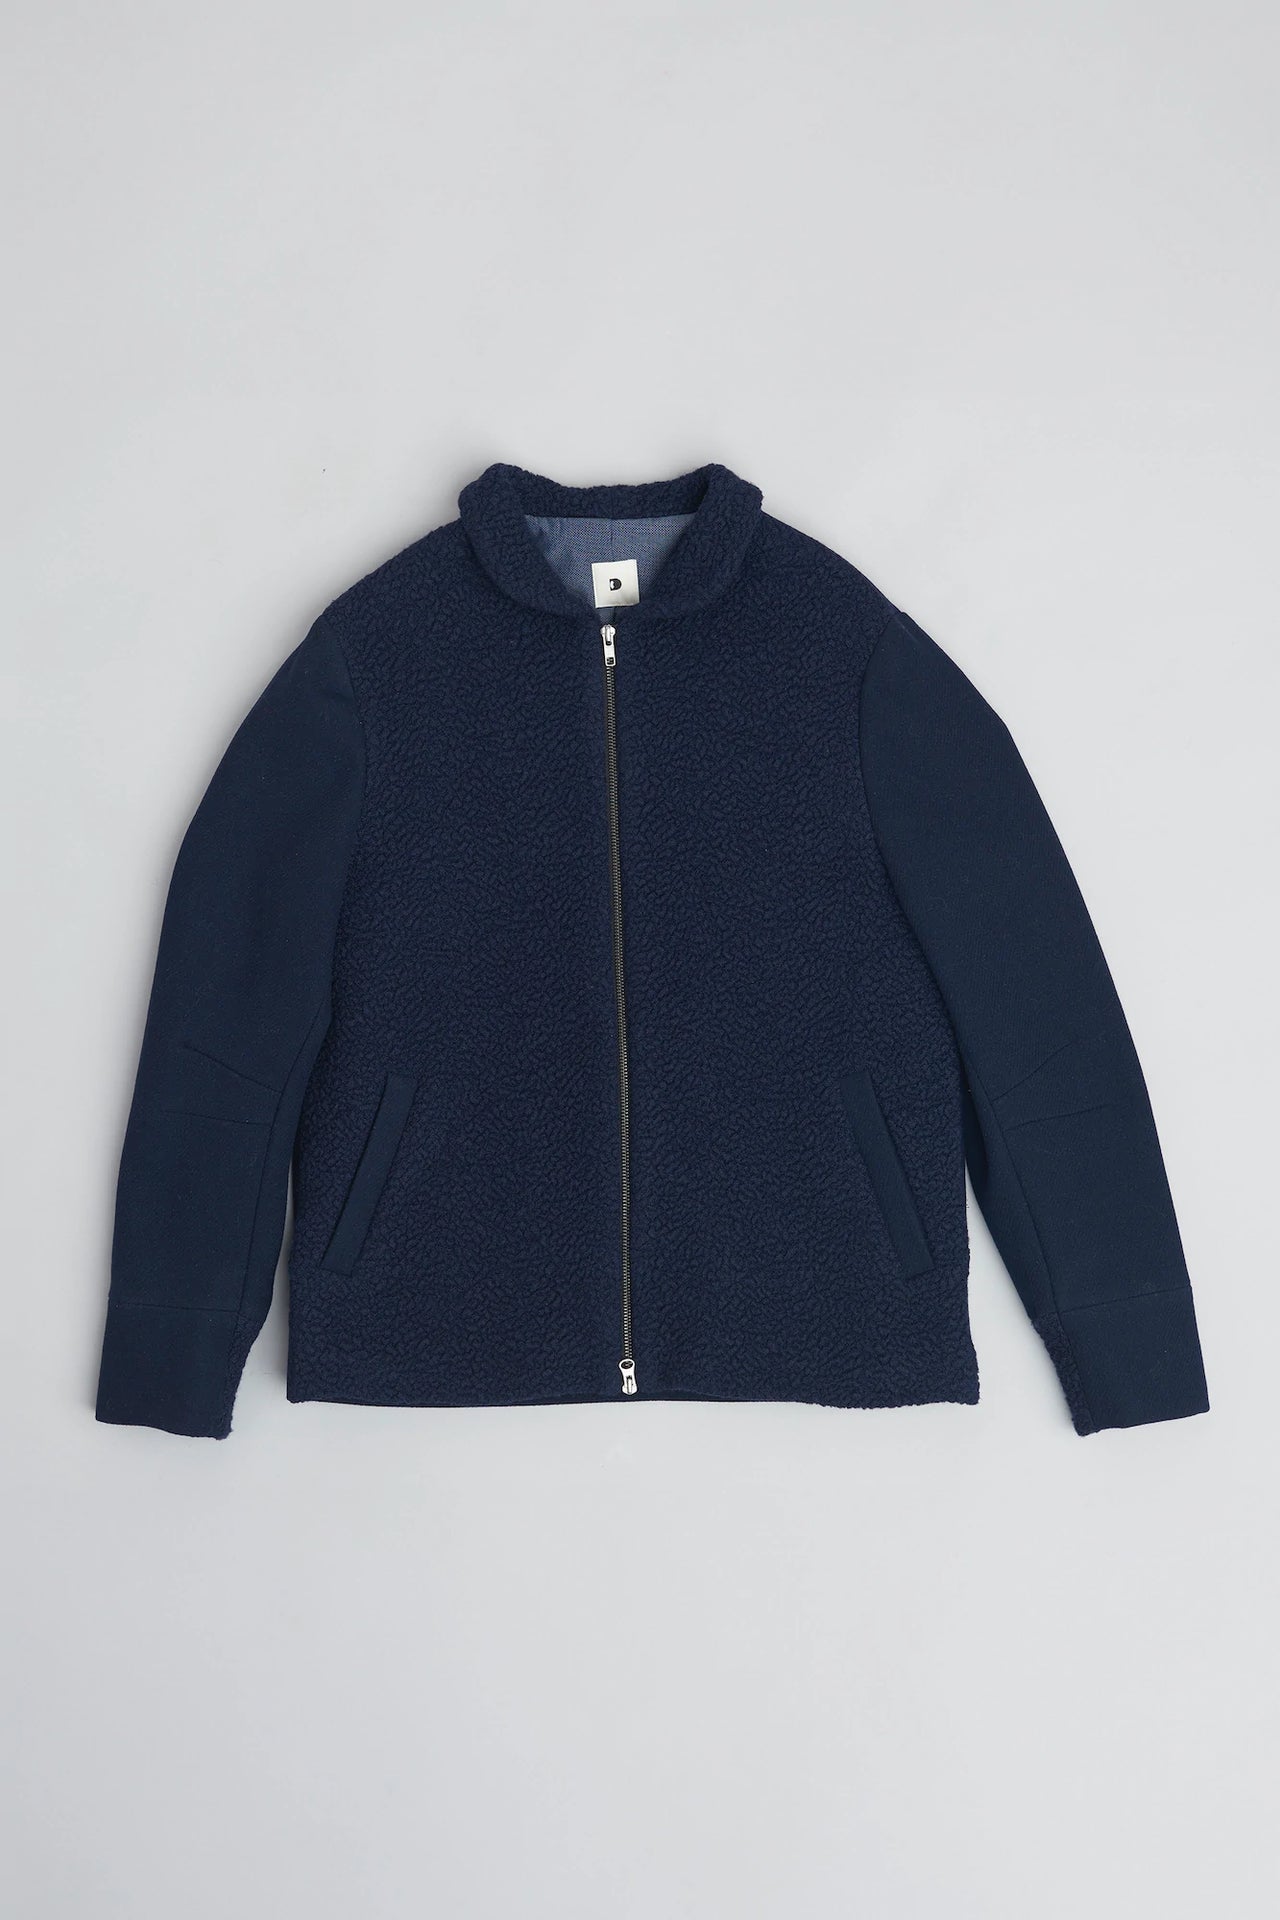 Sporty Round Collar Jacket in a Navy Blue Soft Italian Wool